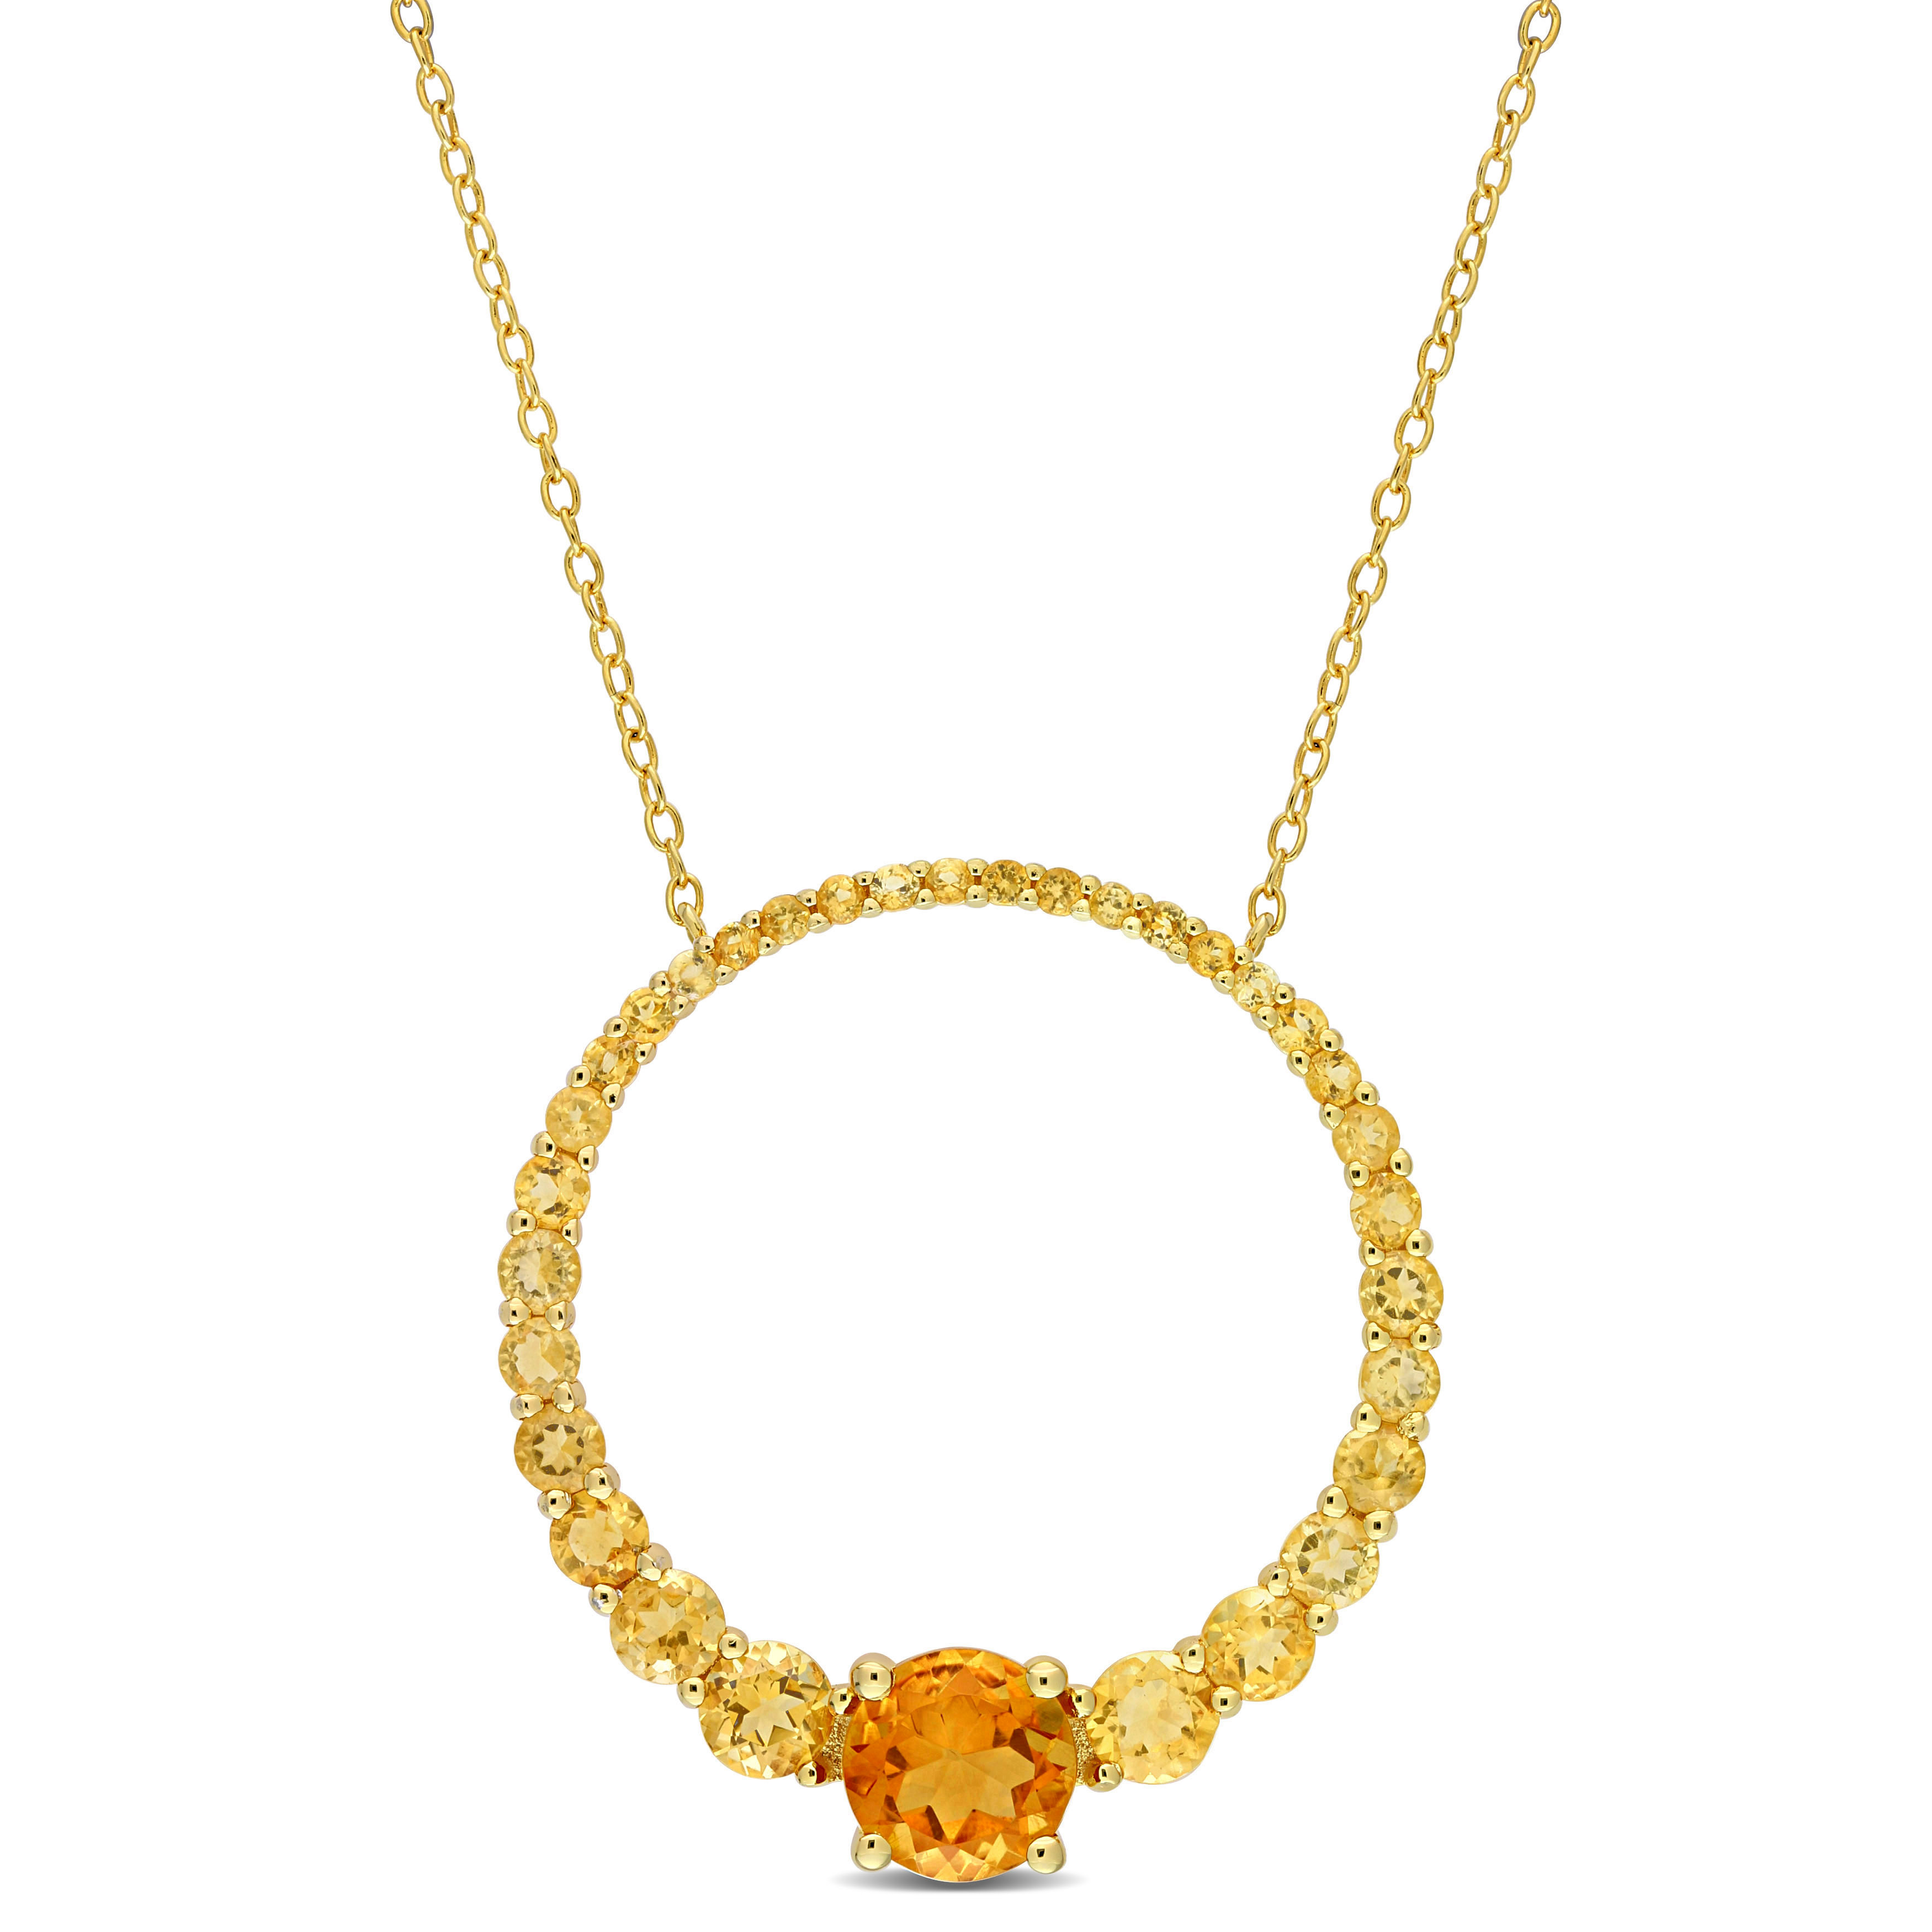 3 1/4 CT TGW Citrine and Madeira Citrine Graduated Open Circle Pendant with Chain in 18k Yellow Gold Plated Sterling Silver - 18 in.